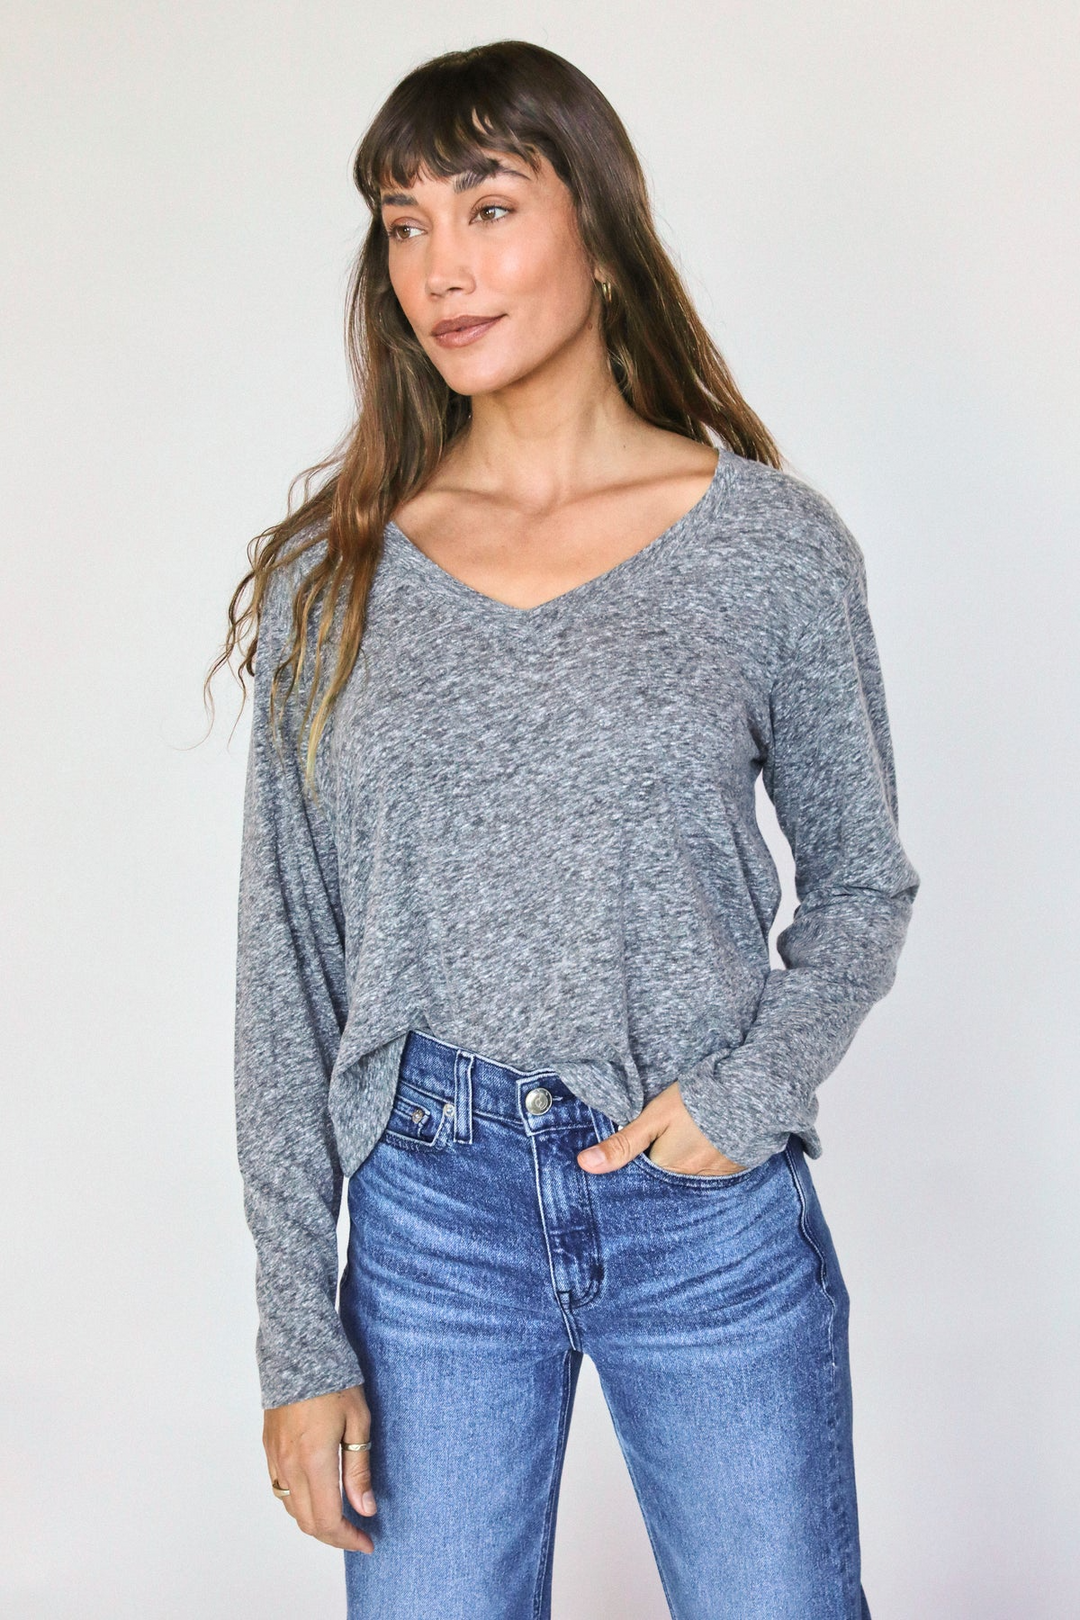 JIMI LONG SLEEVE V-NECK TEE-HEATHER GREY - Kingfisher Road - Online Boutique